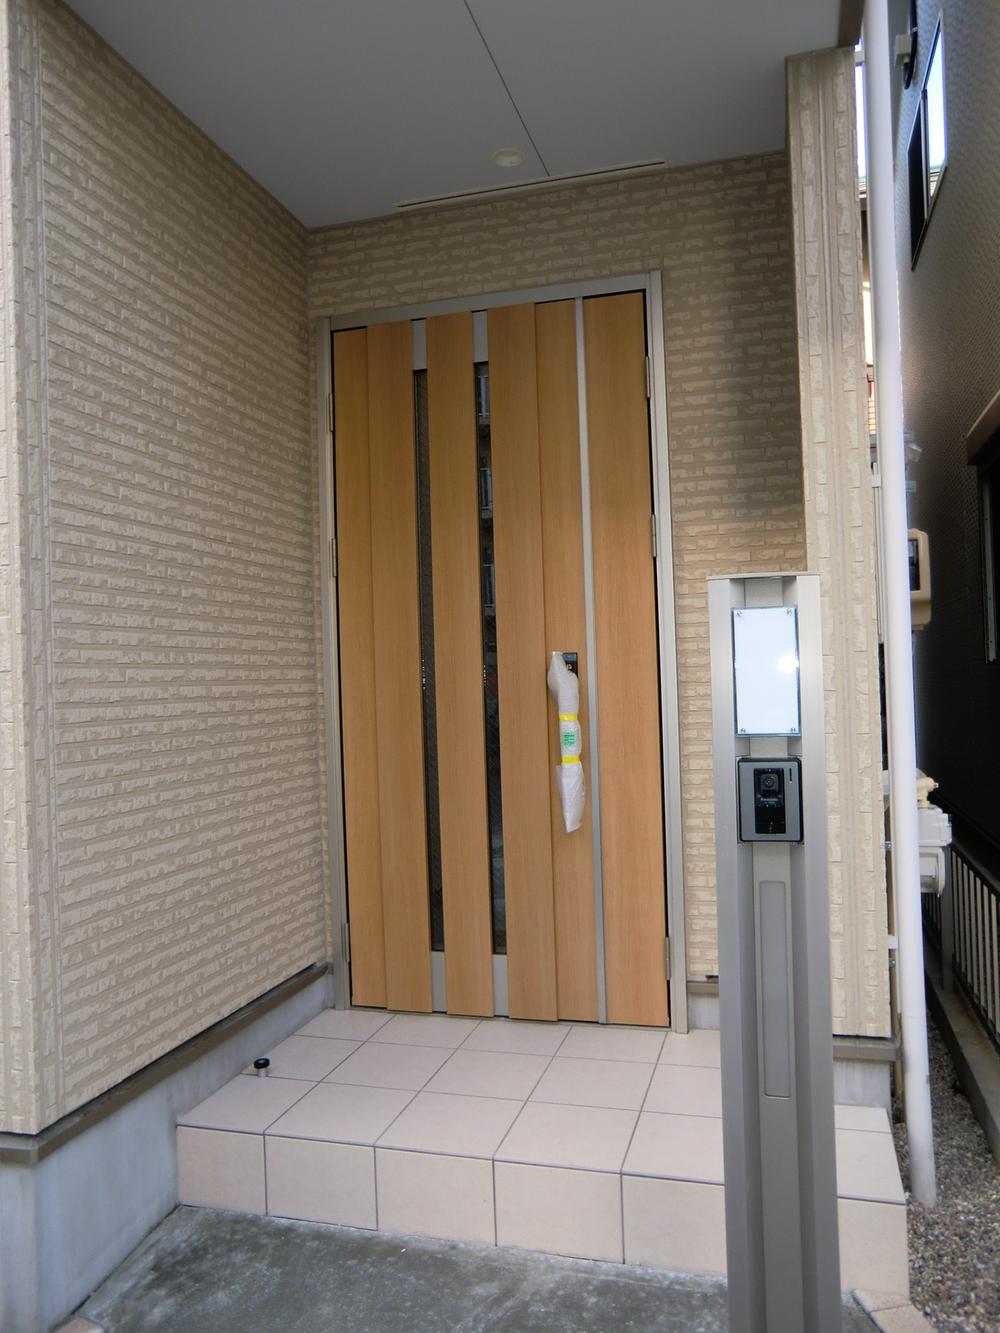 Entrance. ◇ entrance ◇  Fashionable post  Insulated door  